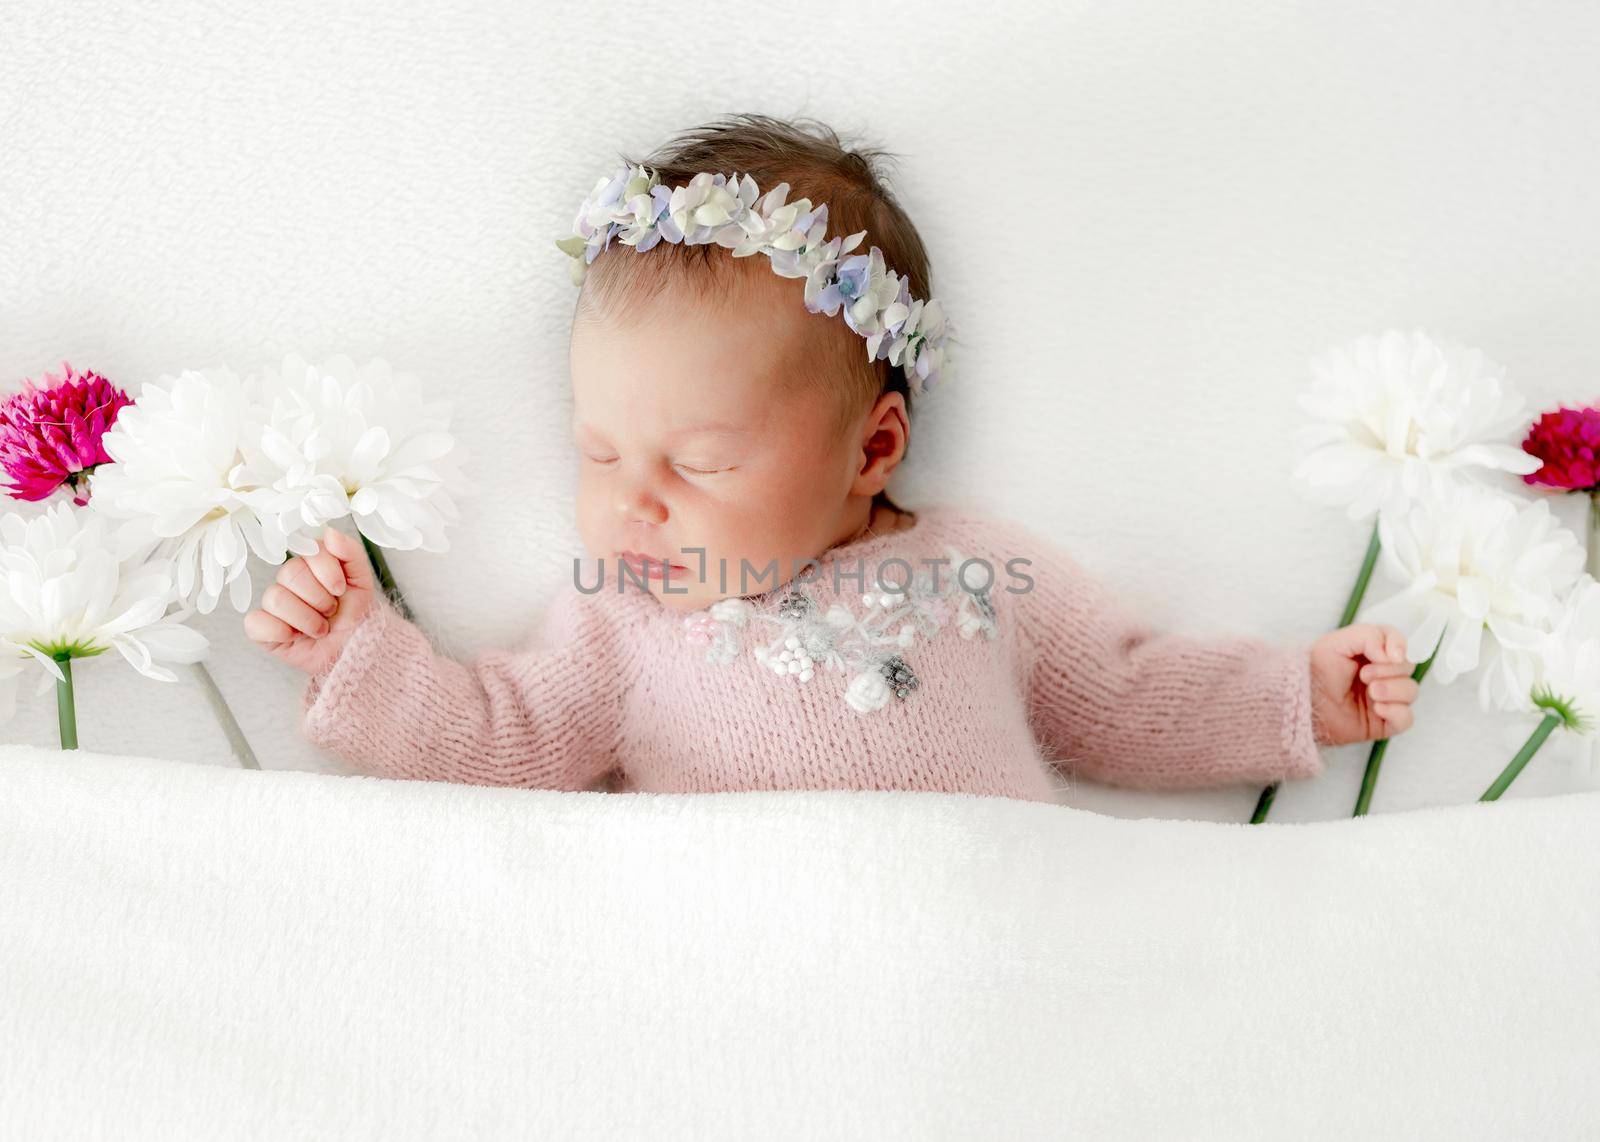 Newborn baby girl wearing wreath sleeping in bed decorated with white and pink flowers. Infant child kid spring blossom studio portrait